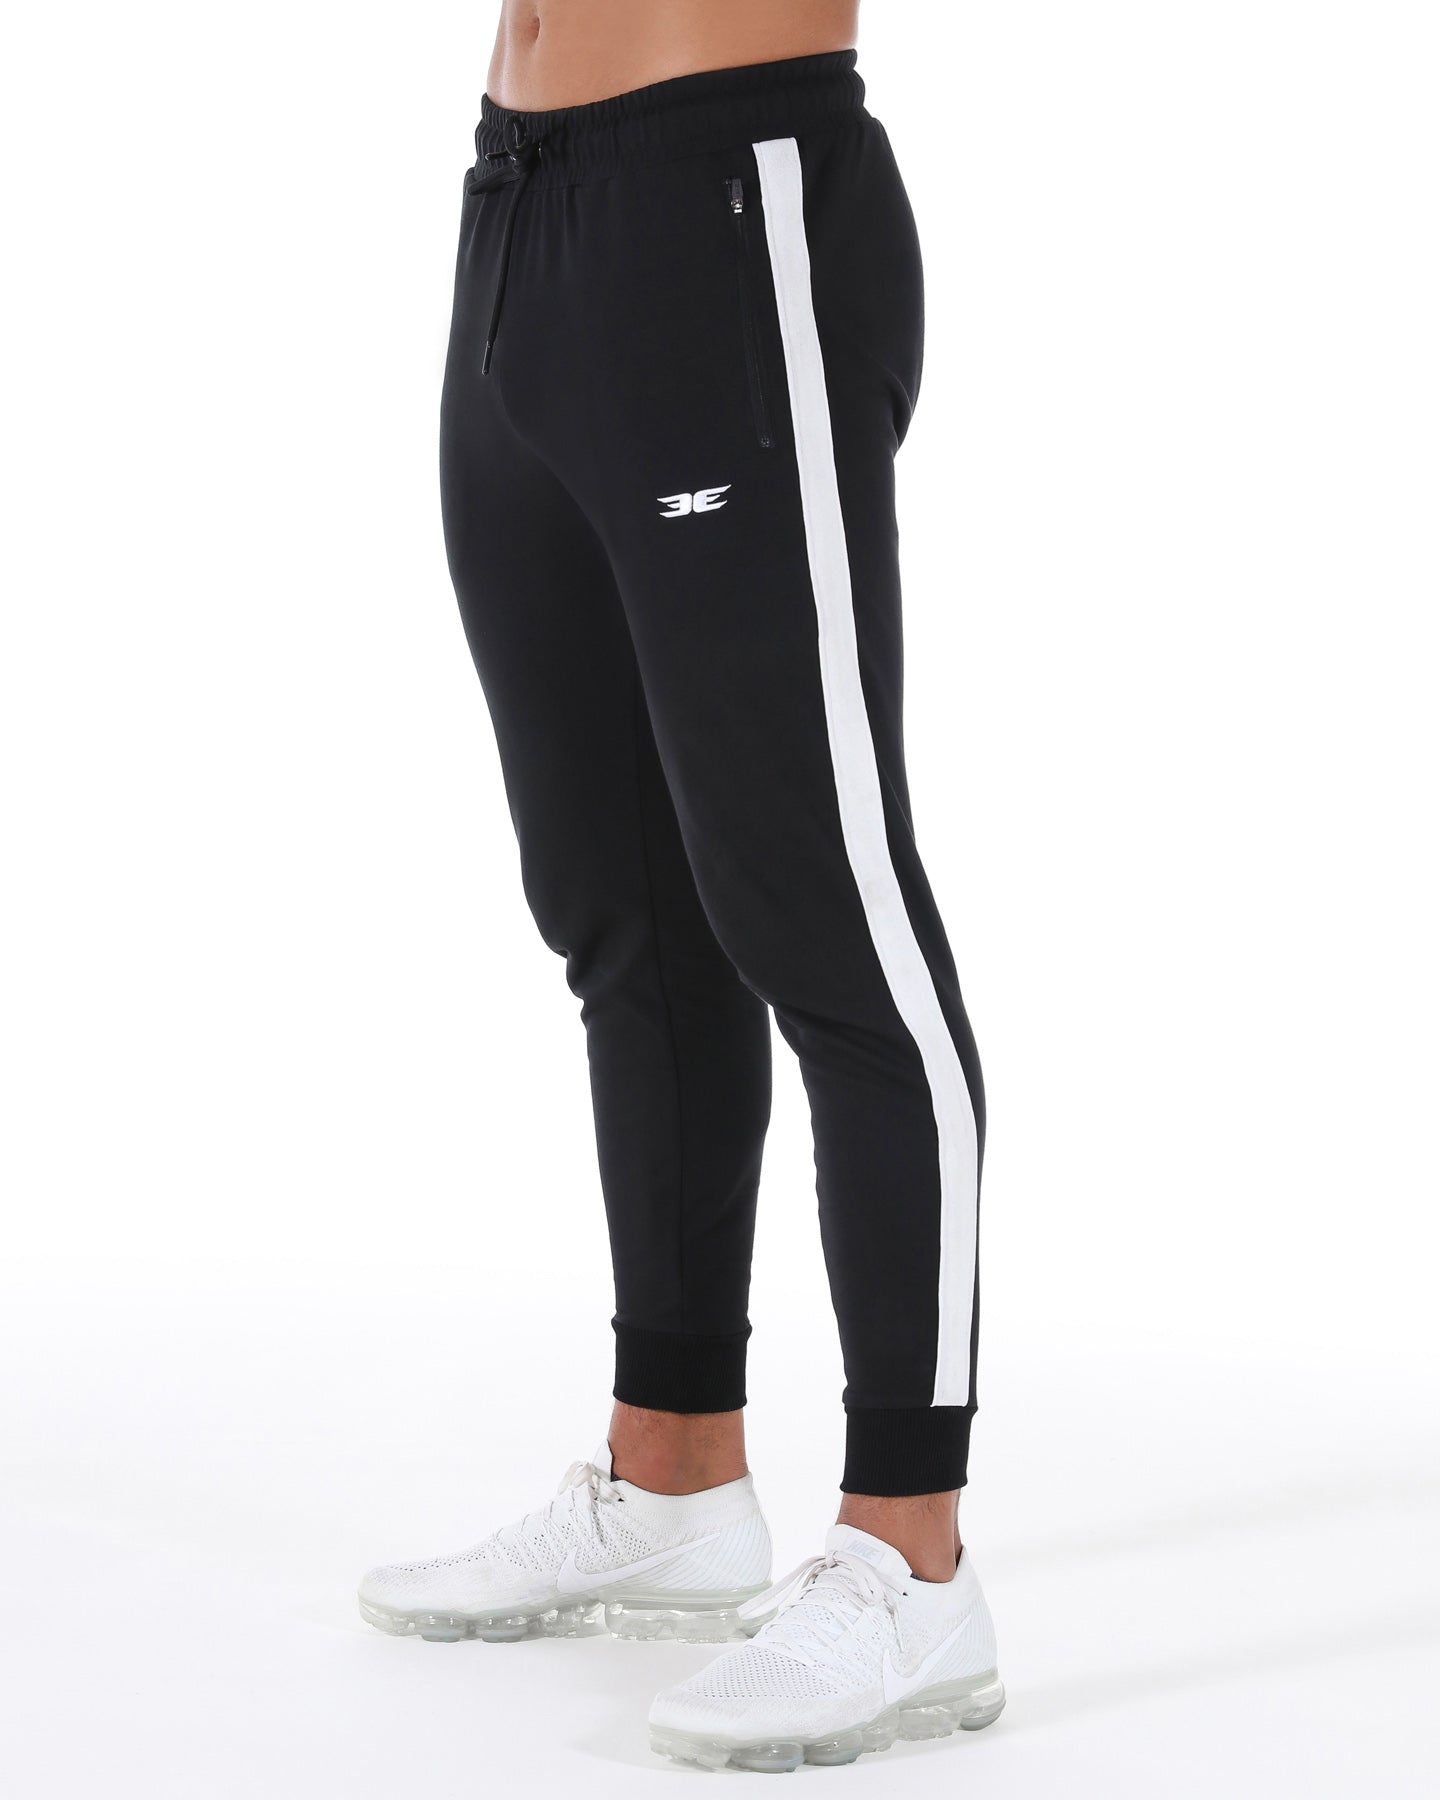 Elite Eleven - Joggers and Pants